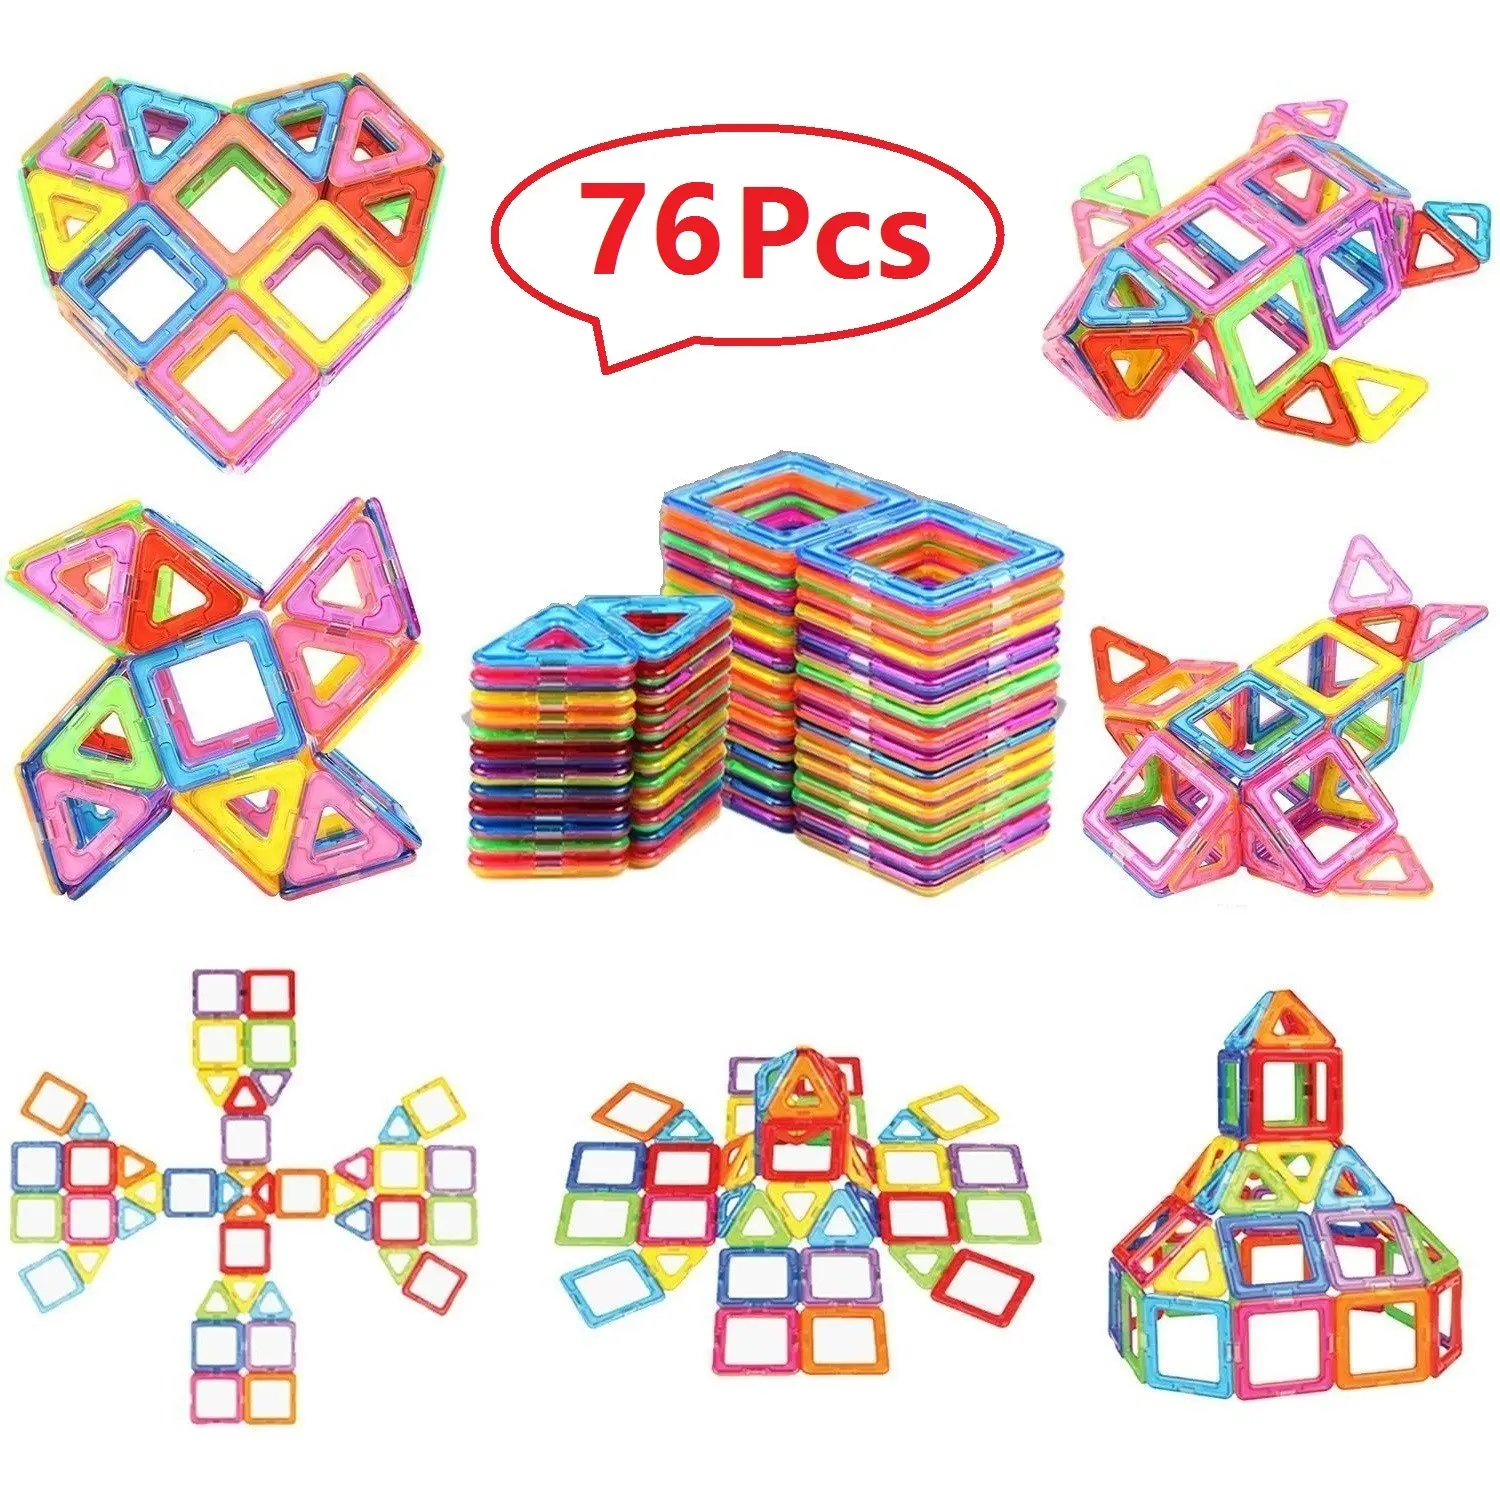 Set of 4 Colorful Blocks with 24 Vinyl Photo Pockets to Personalize CP Toys Photo Pocket Foam Stacking Blocks JOL-22 Ages 12 Months